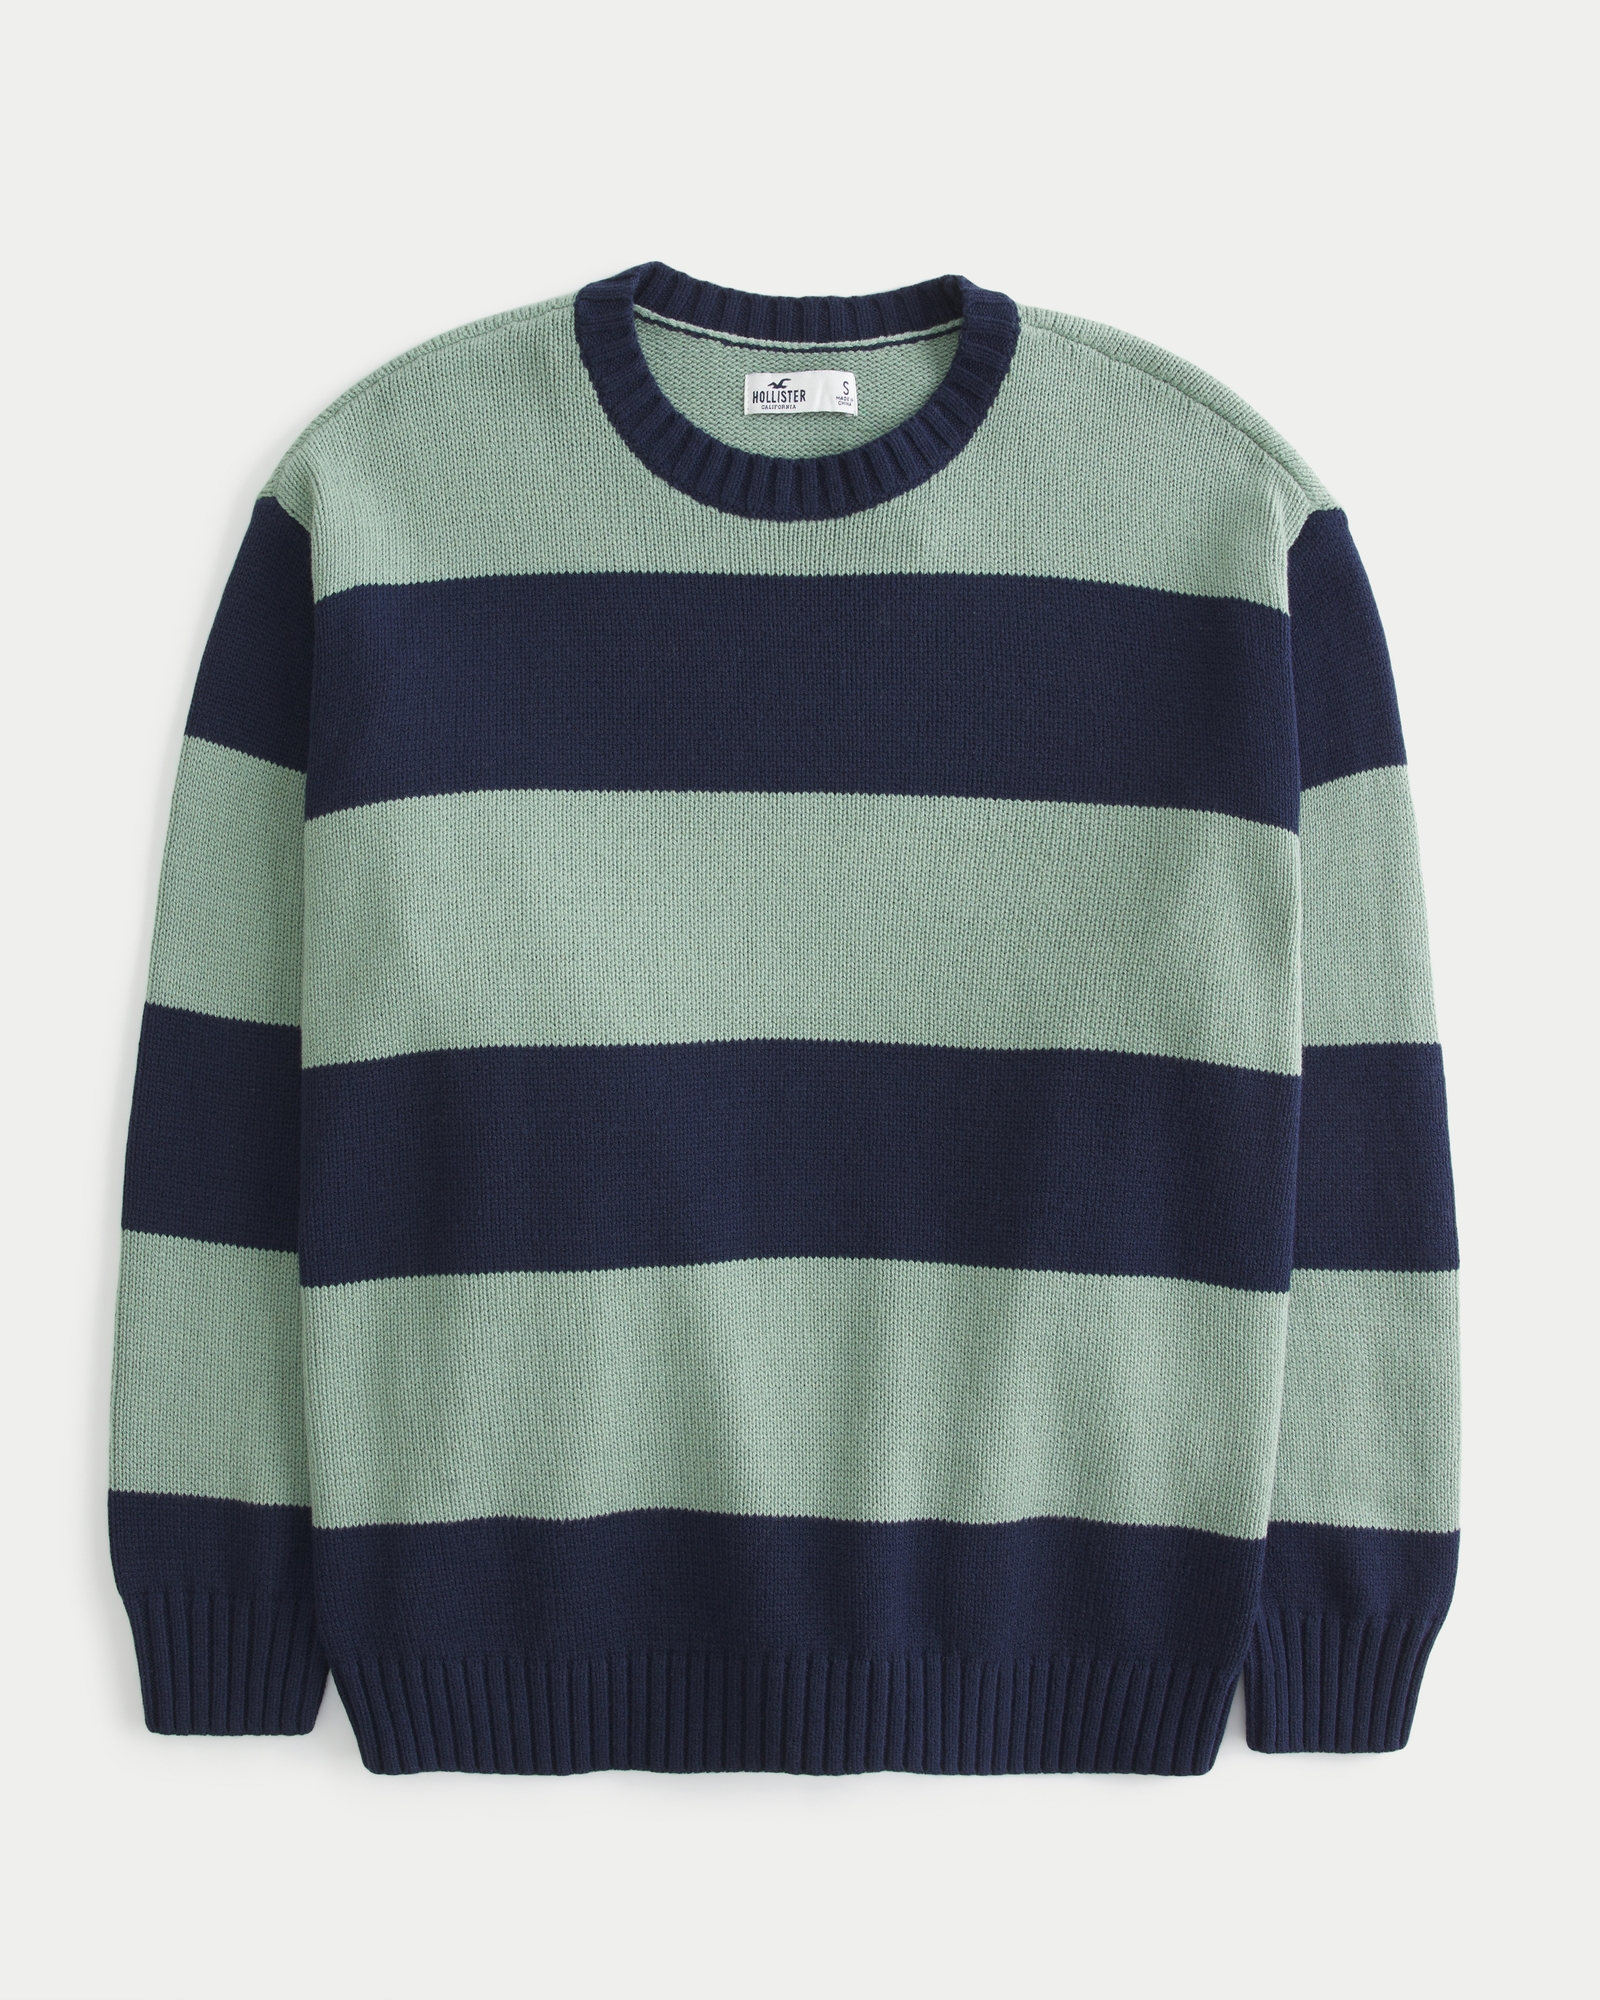 https://img.hollisterco.com/is/image/anf/KIC_350-3239-0069-324_prod1.jpg?policy=product-extra-large